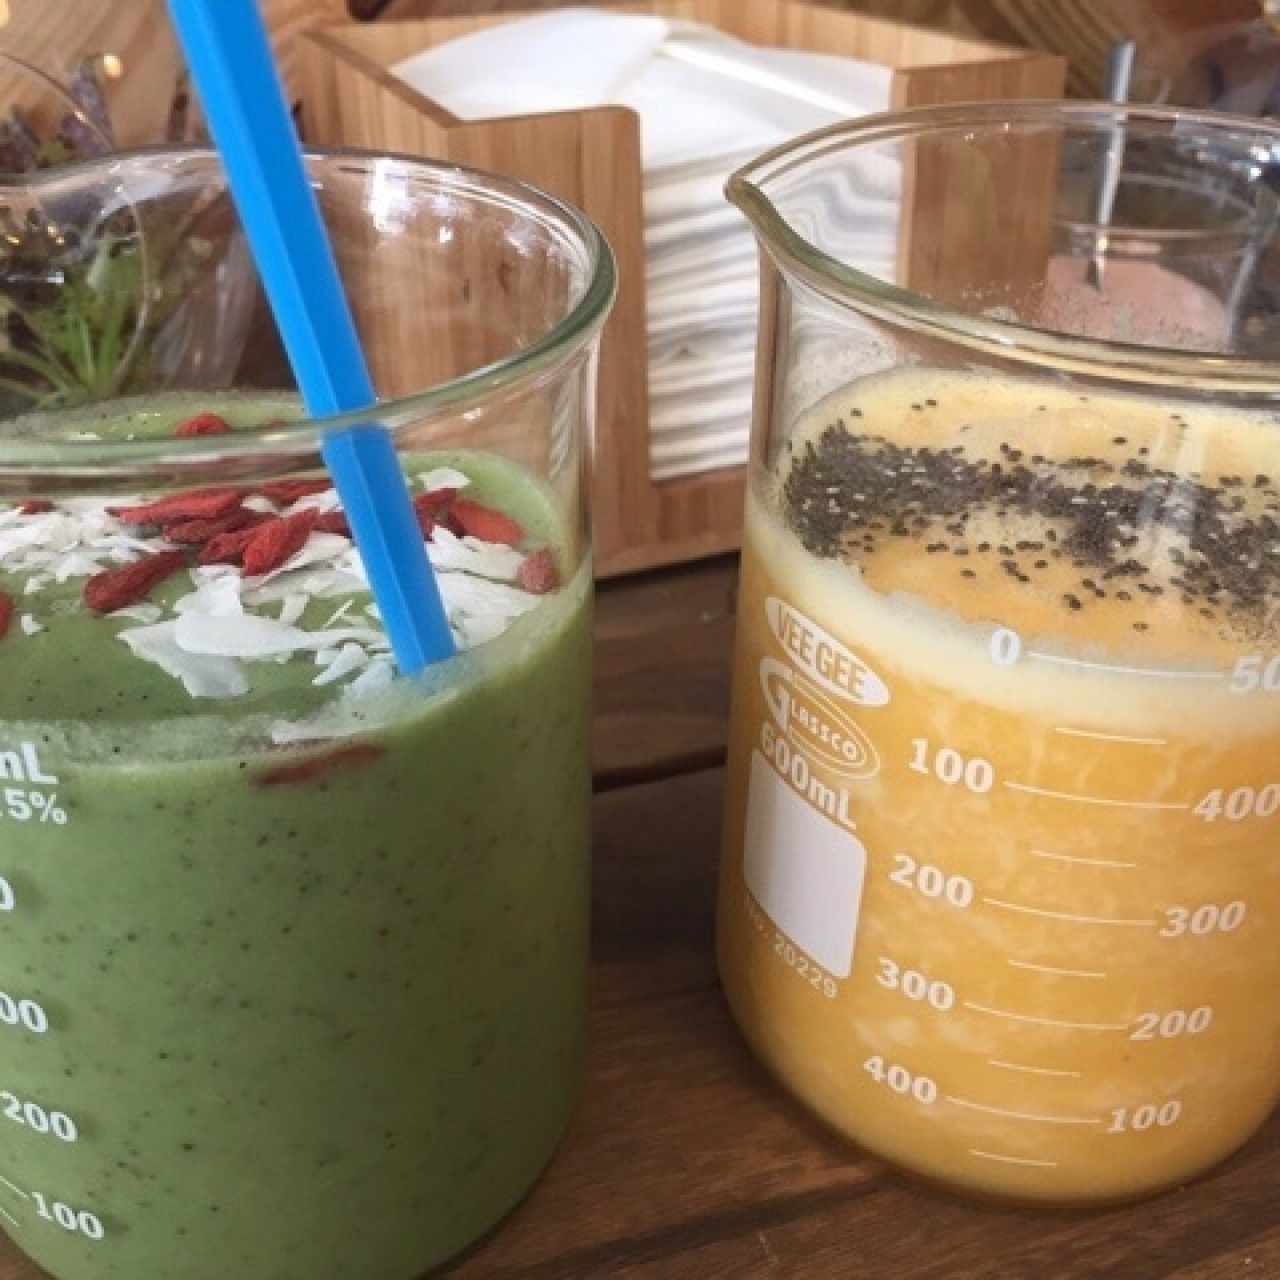 Incredible made to order juices!